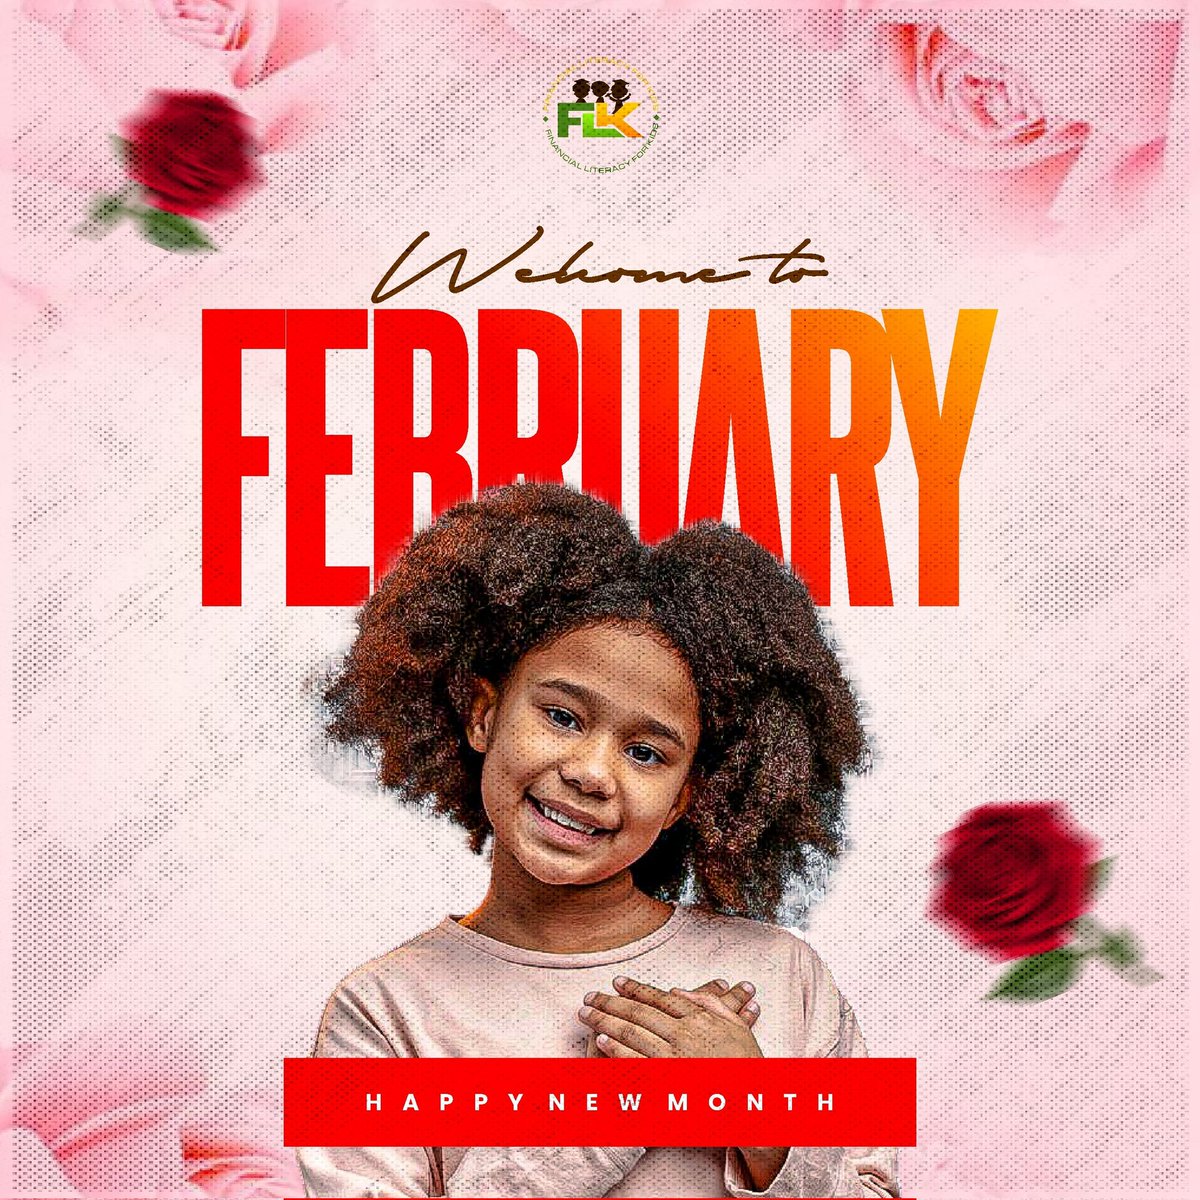 Happy New Month from all of us at FLK...
Welcome to the month of Love.

Don't forget to purchase our Super Amazing Tees for your Children and Young Adults.

#financialliteracyforkids #finlit4kids #finlit4teens  #childrenintech #AyomideAkinsola #TheMoneyWoman #ChildFinanceCoach